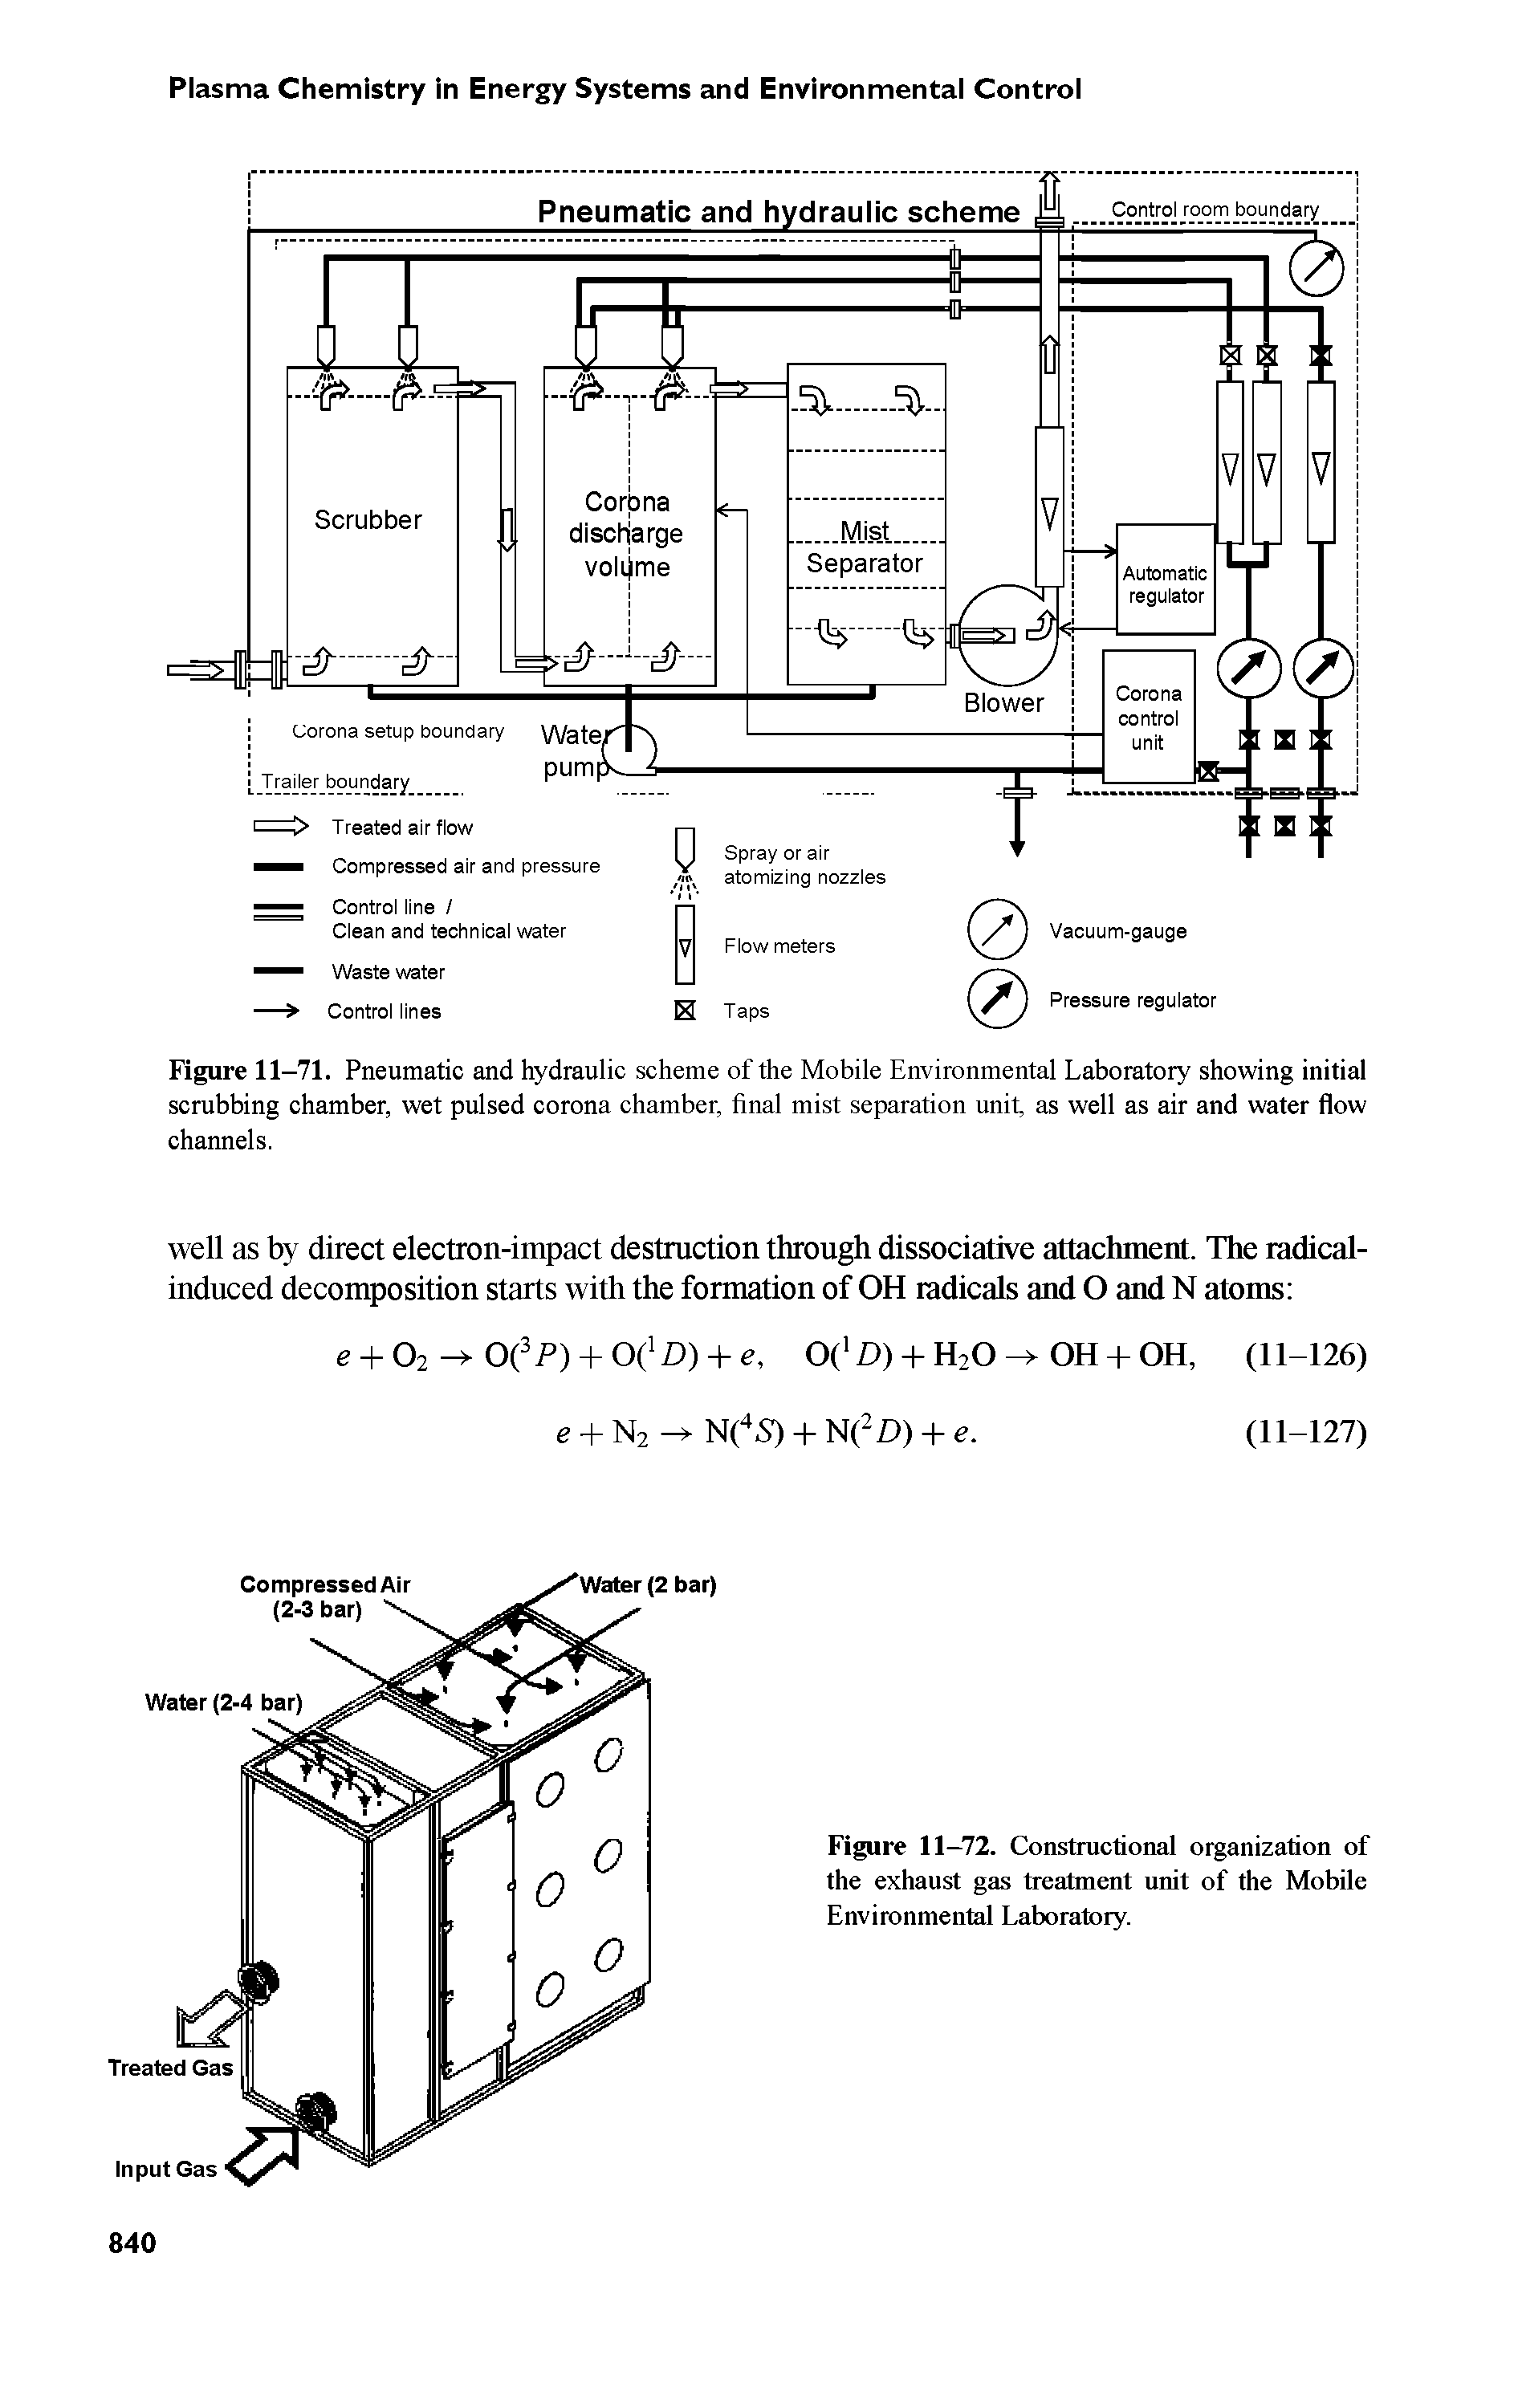 Figure 11-71. Pneumatic and hydraulic scheme of the Mobile Environmental Laboratory showing initial scrubbing chamber, wet pulsed corona chamber, final mist separation unif as well as air and water flow channels.